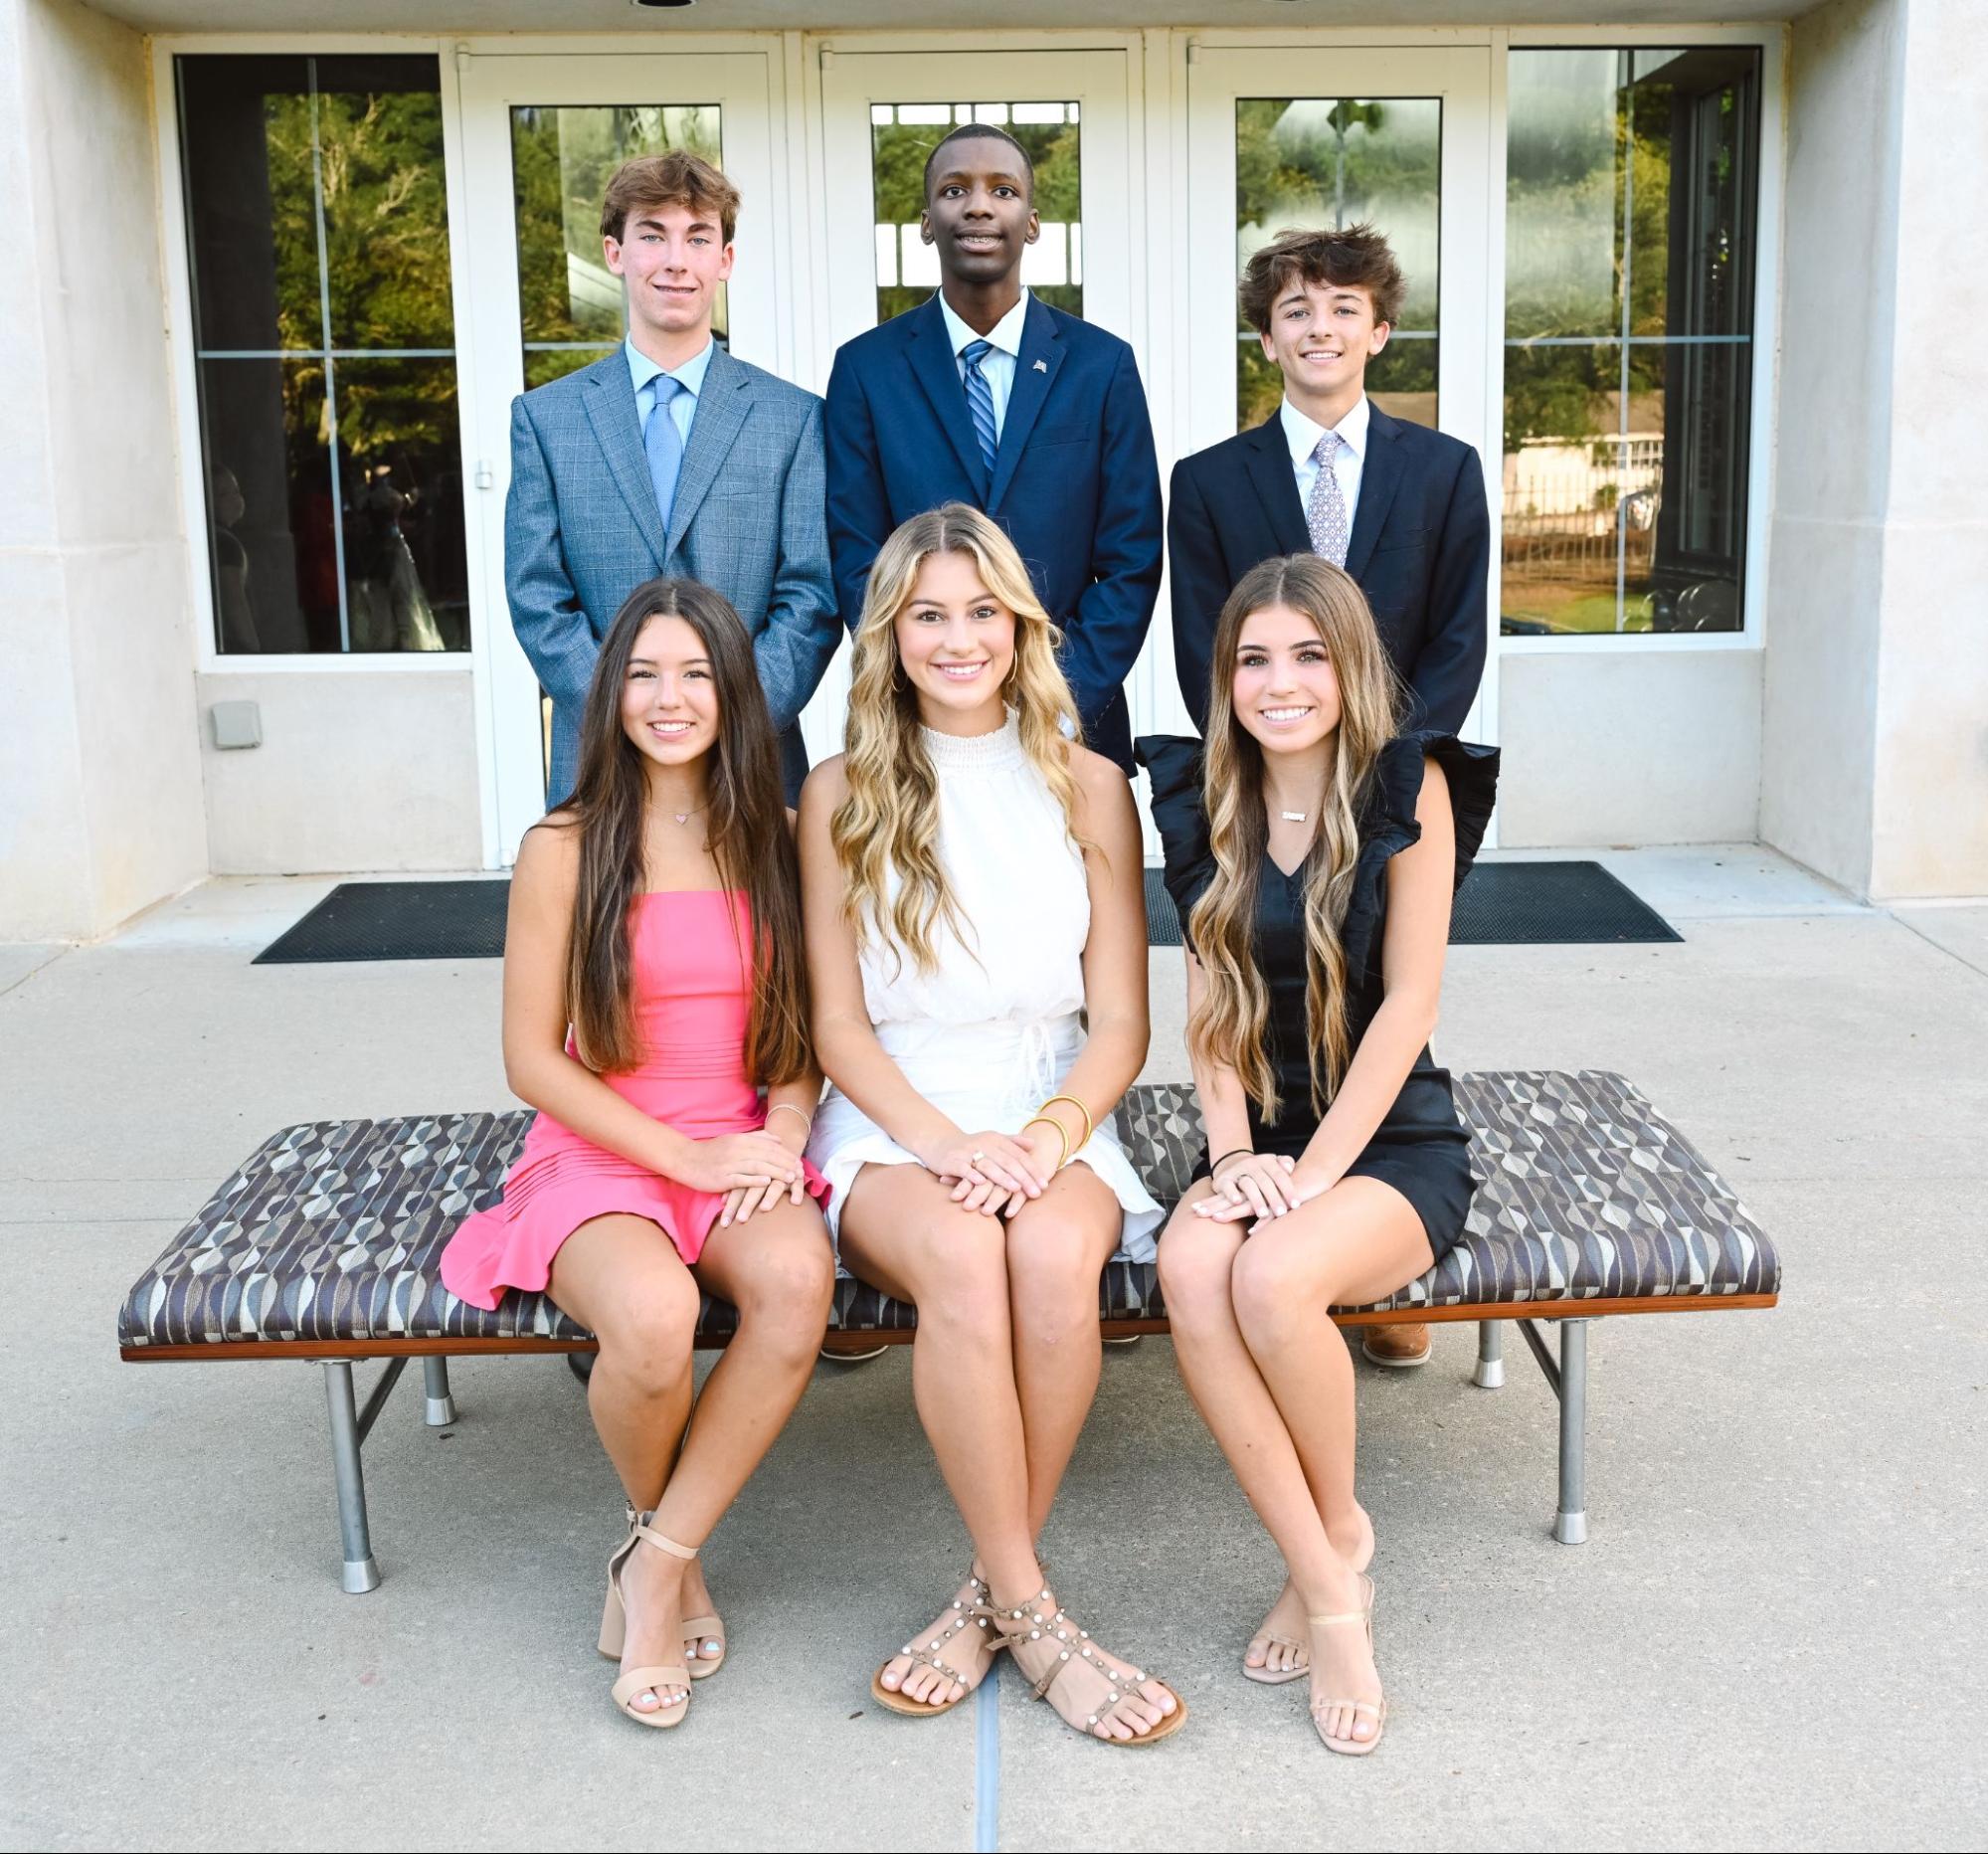 Cambridge homecoming court and activities